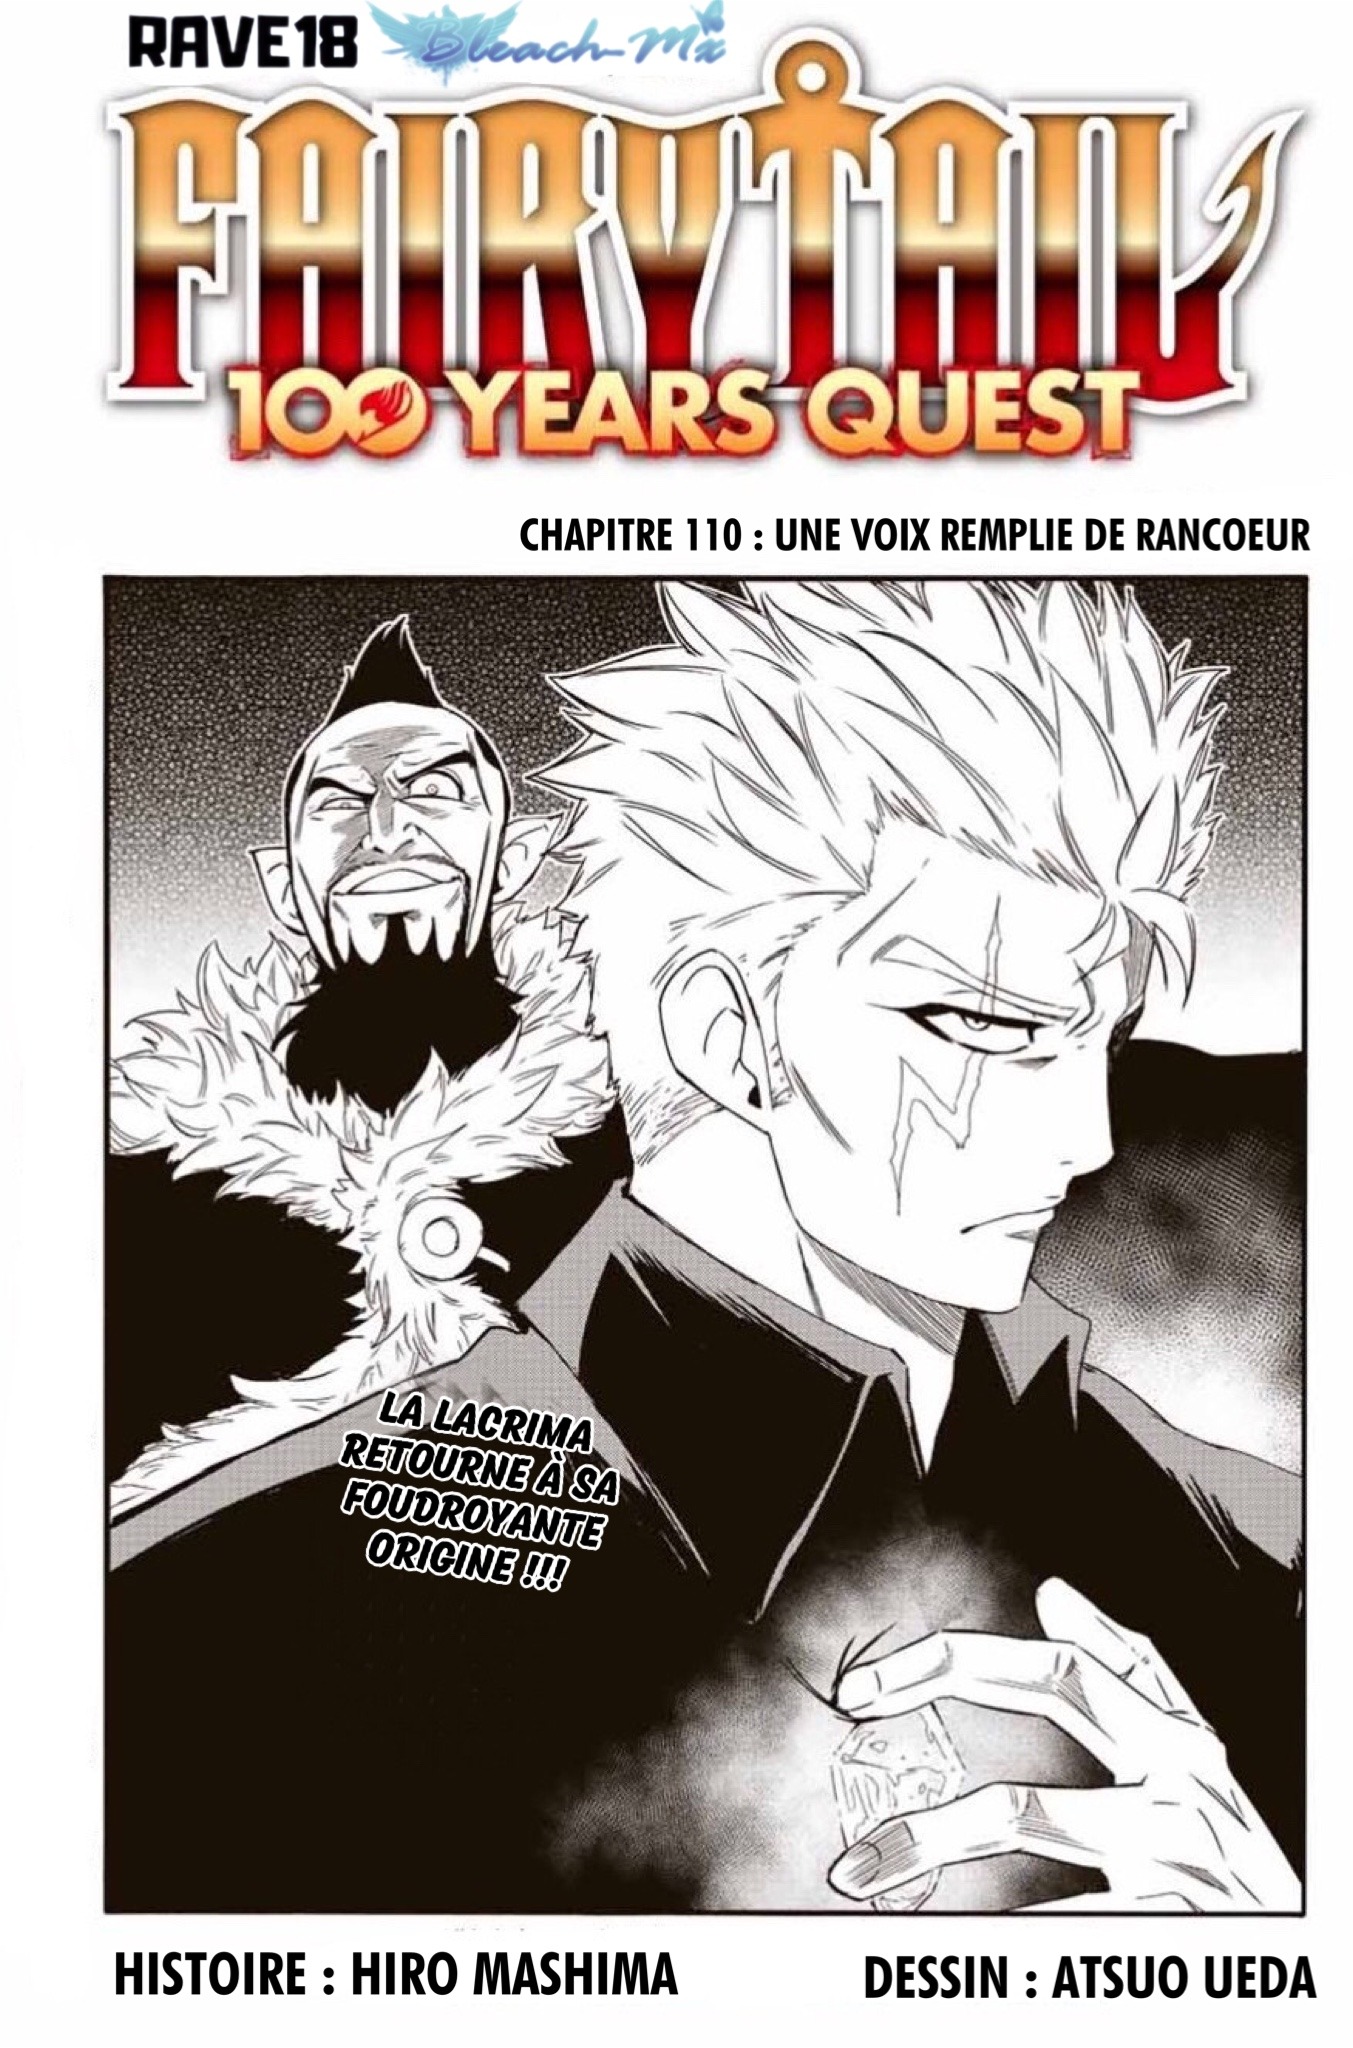 Fairy Tail 100 Years Quest: Chapter chapitre-110 - Page 1